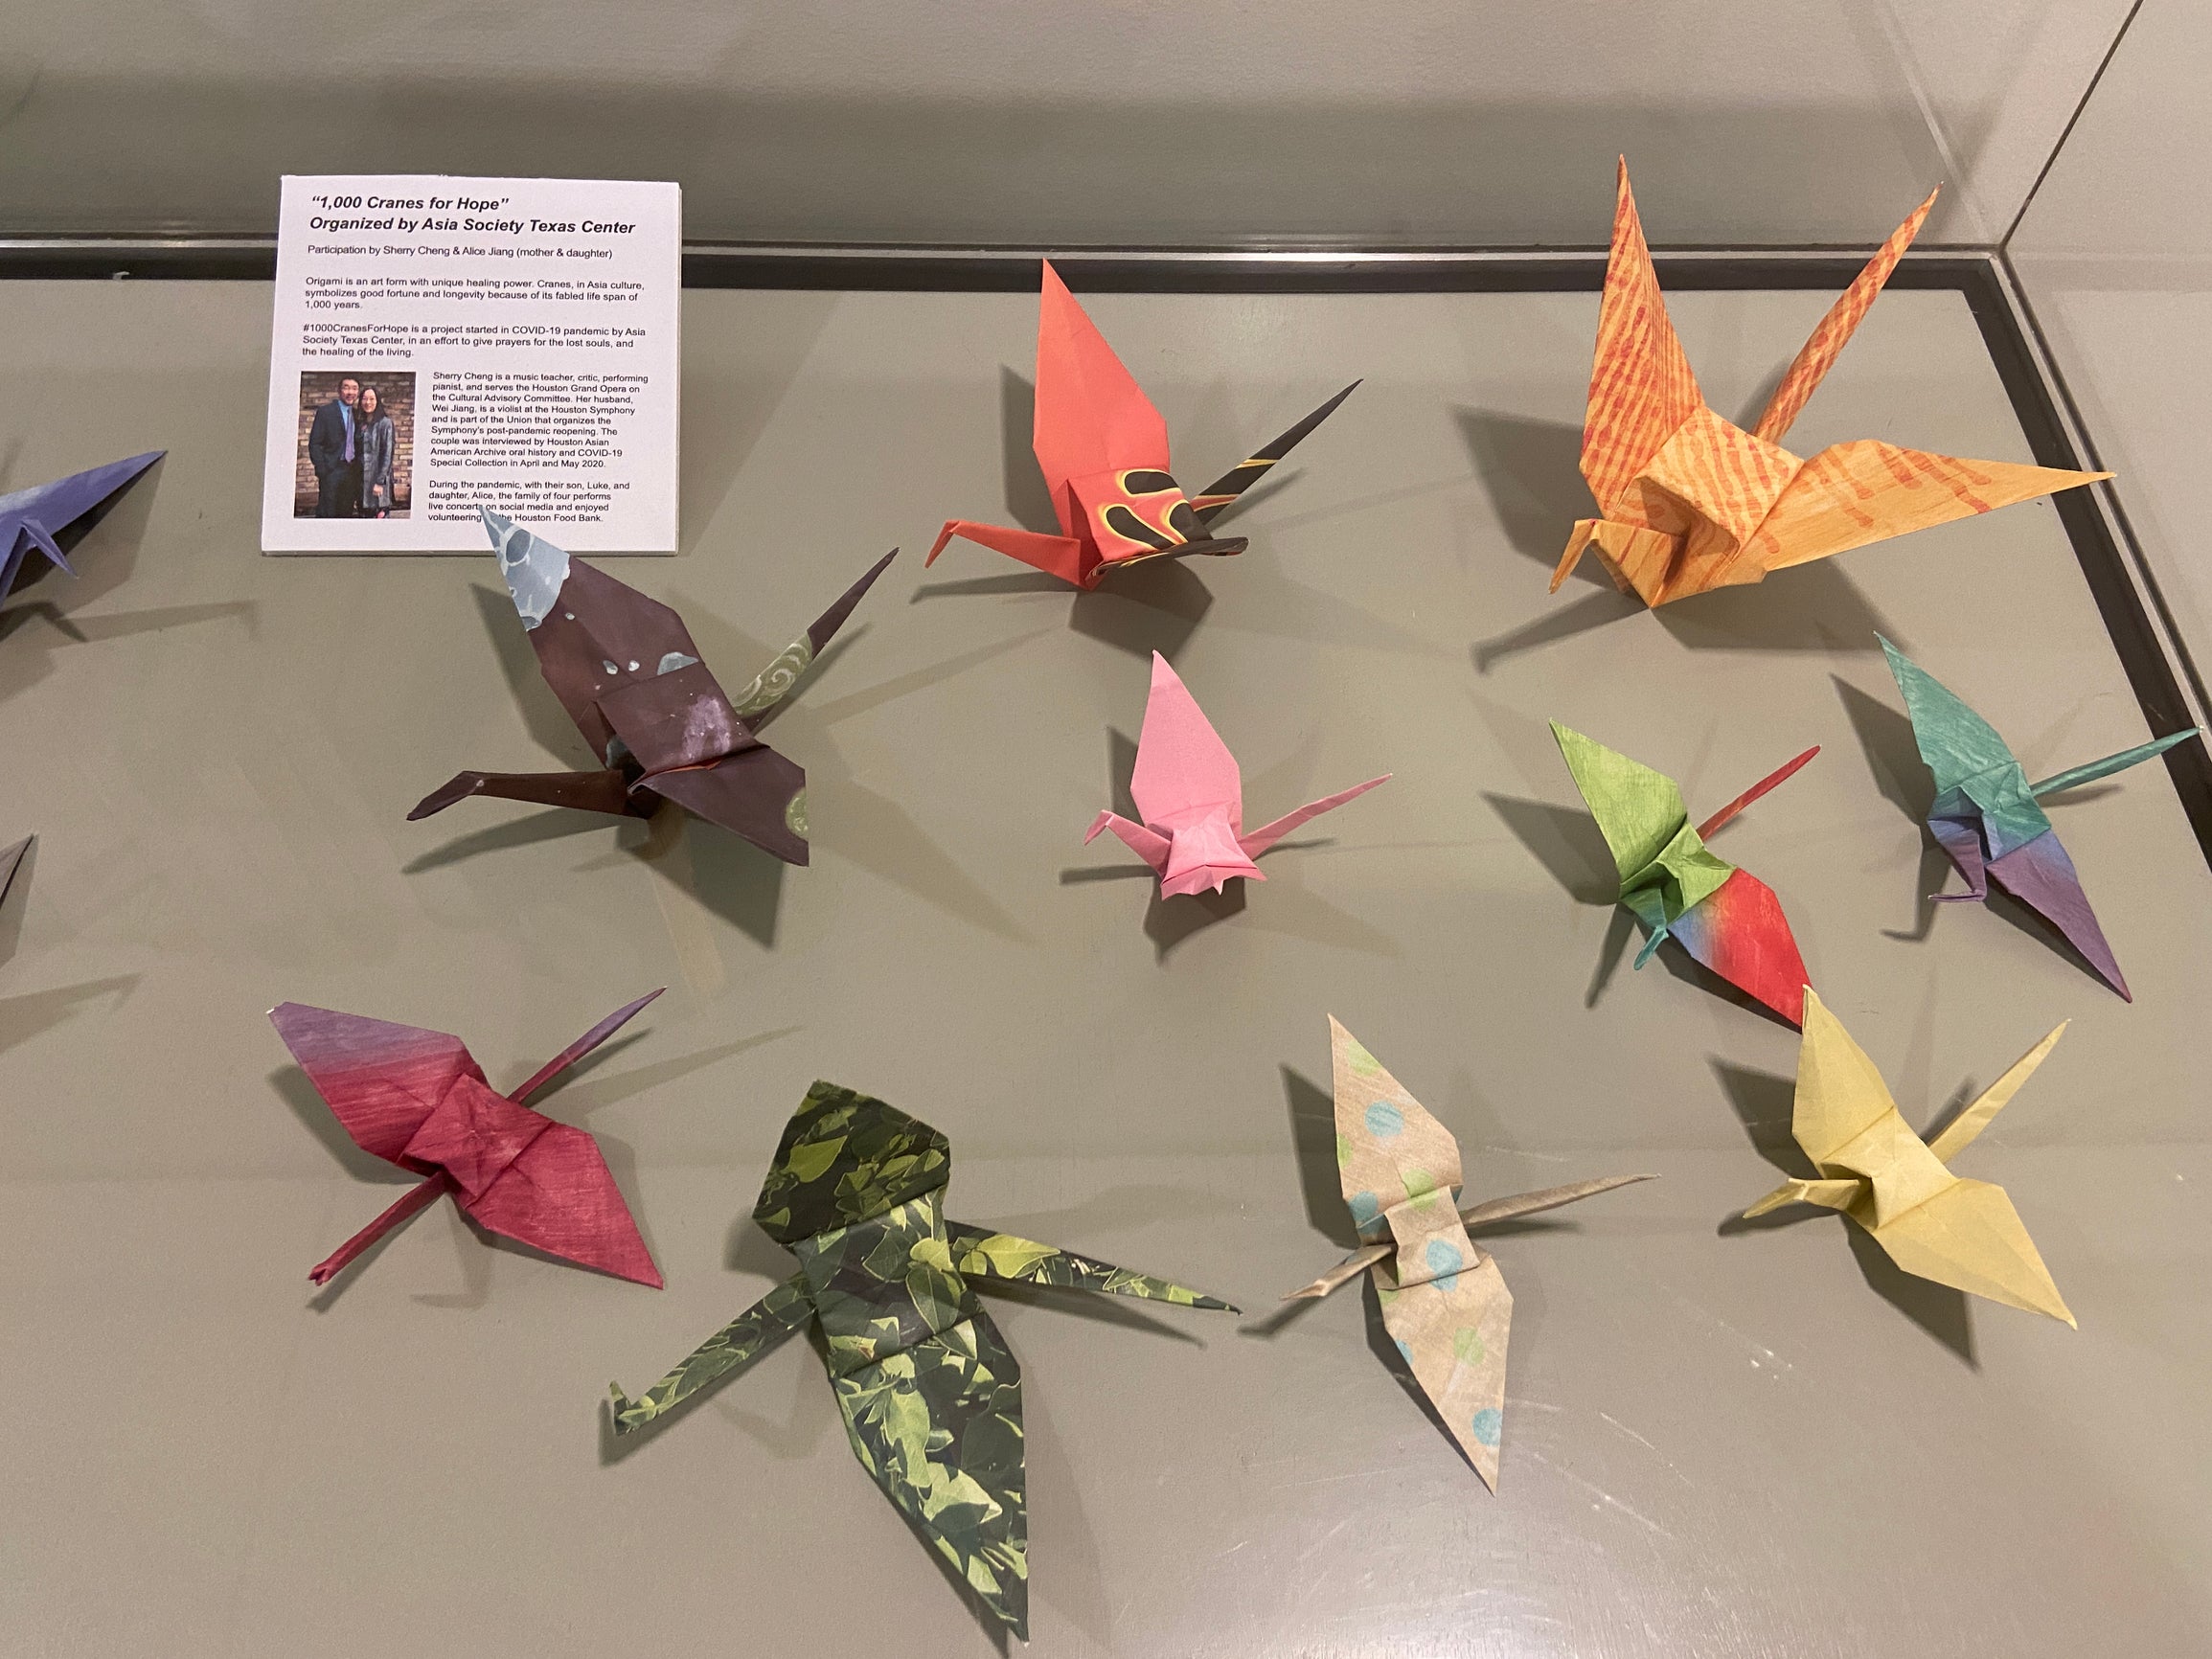 A collection of paper origami cranes